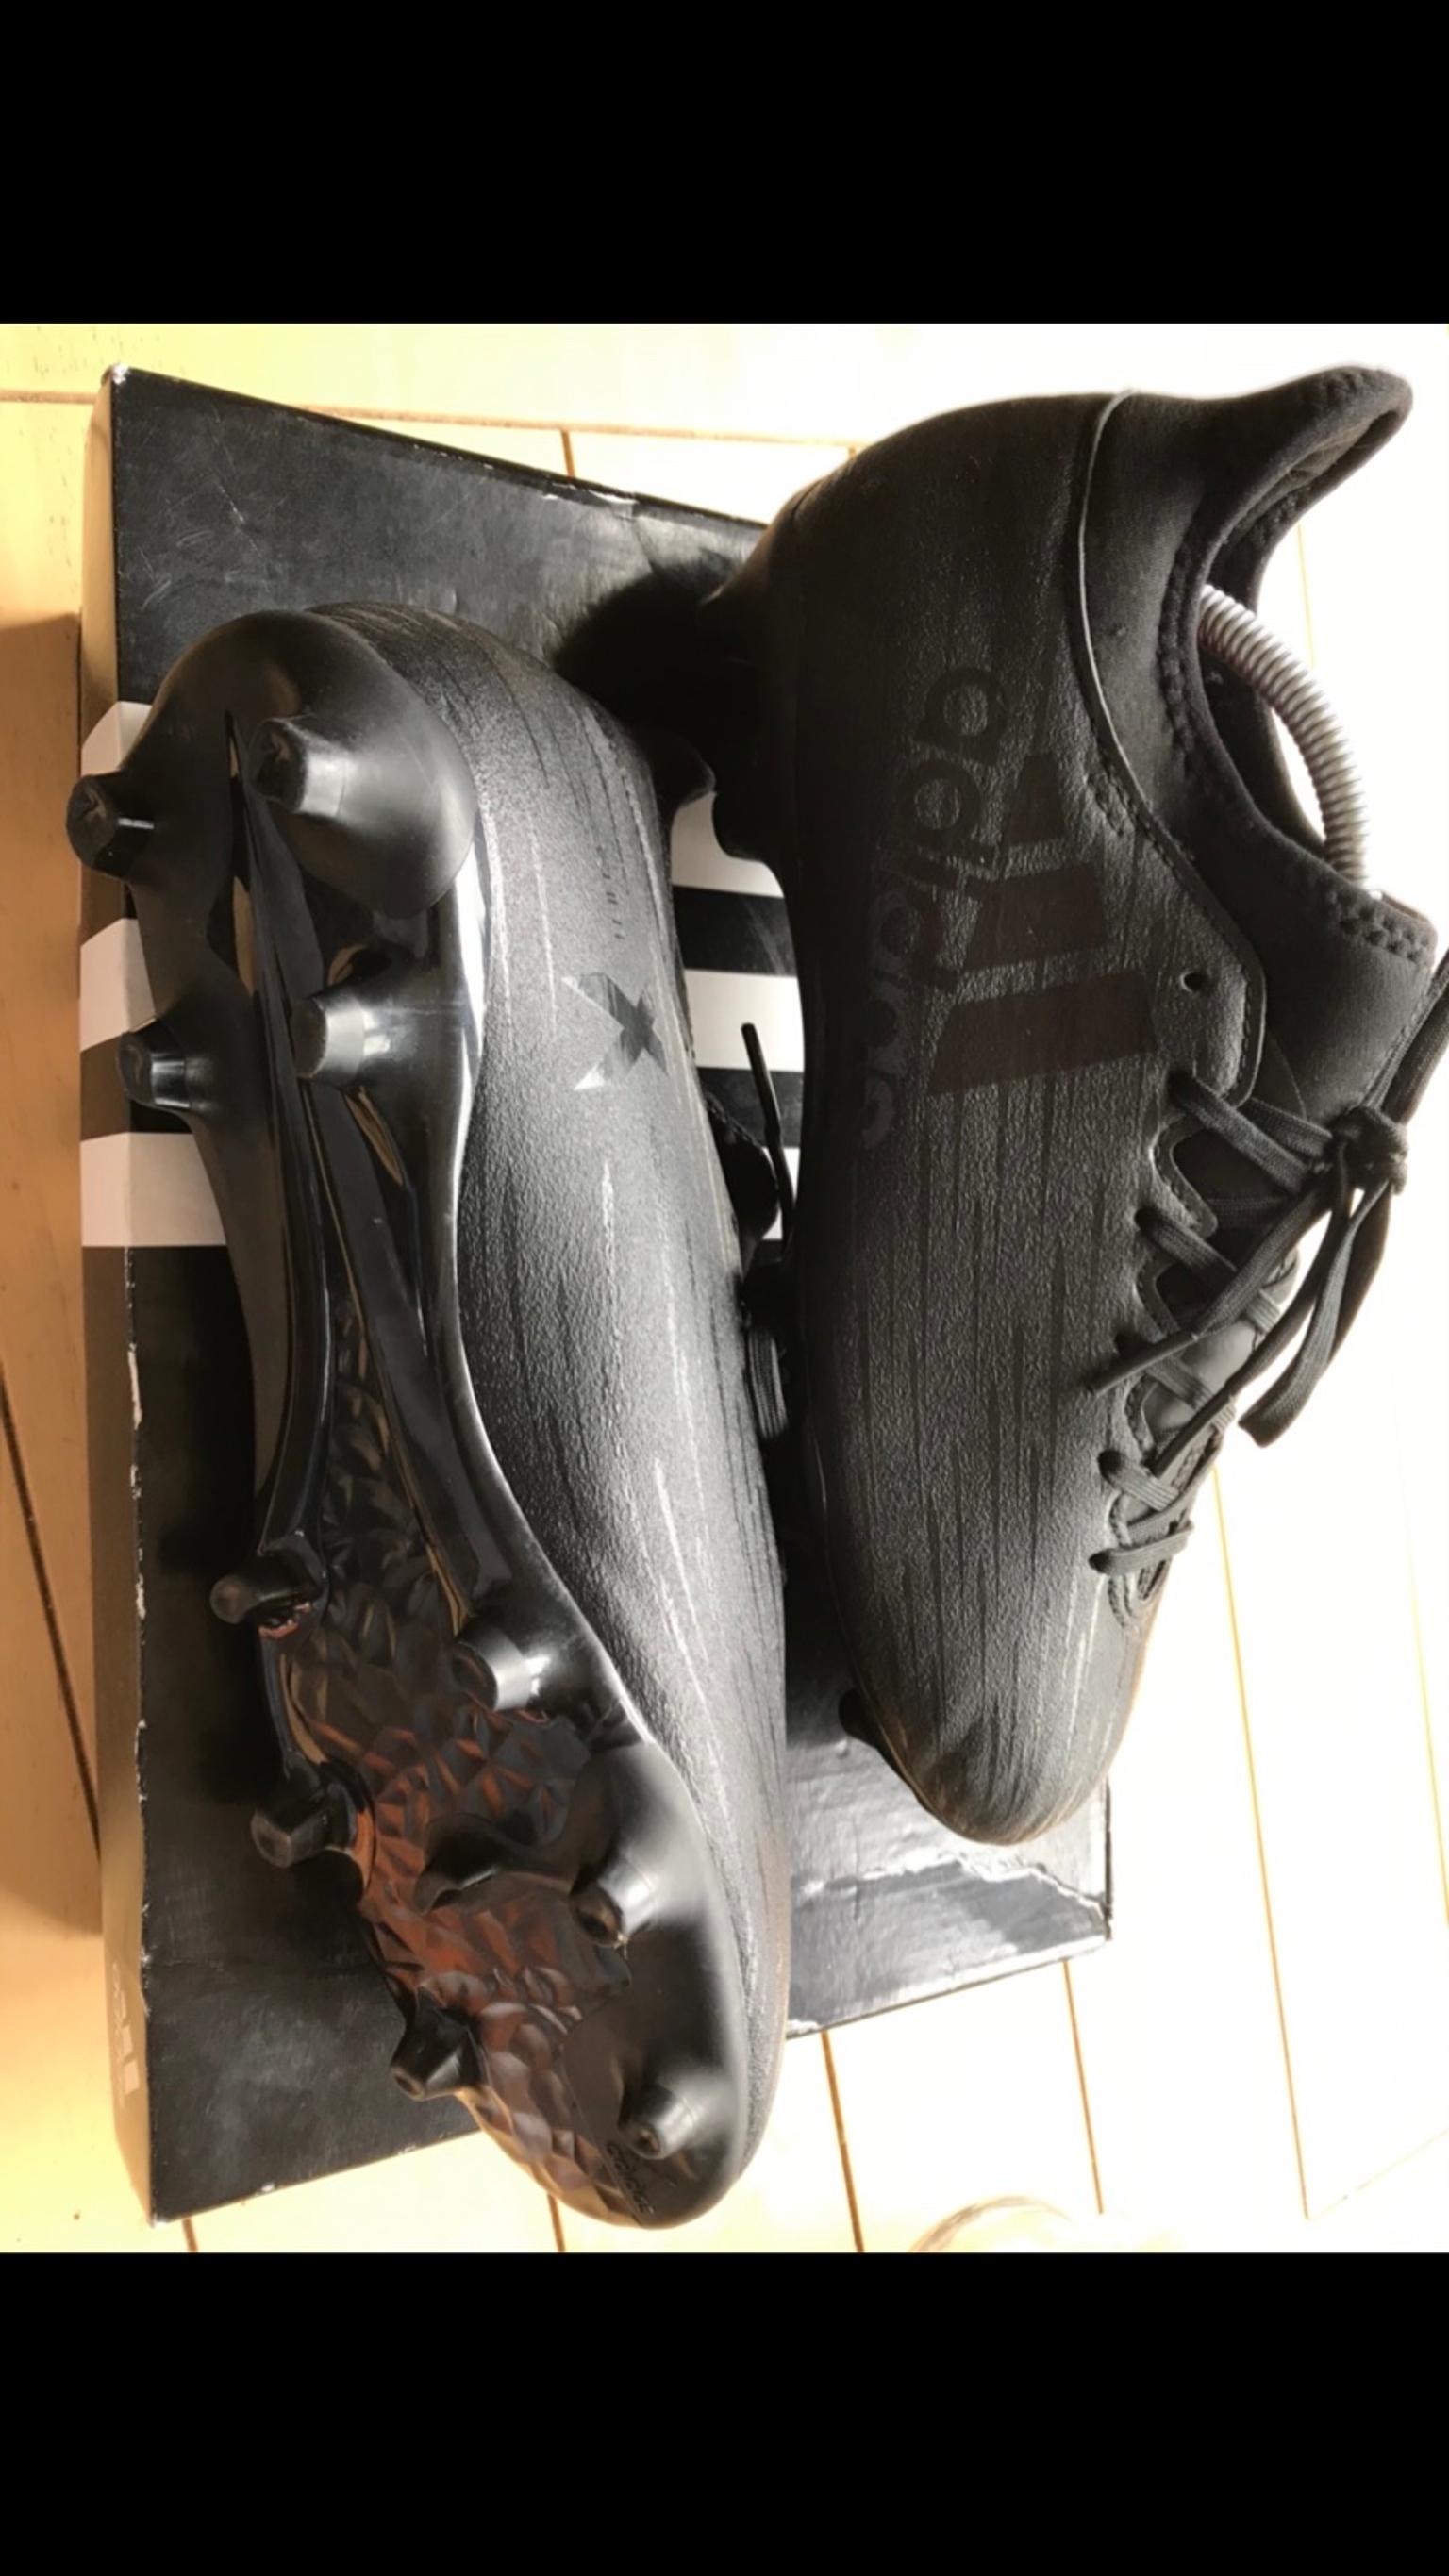 Adidas X 16.3 Football Boots Blackout in London Borough of Havering for  £50.00 for sale | Shpock